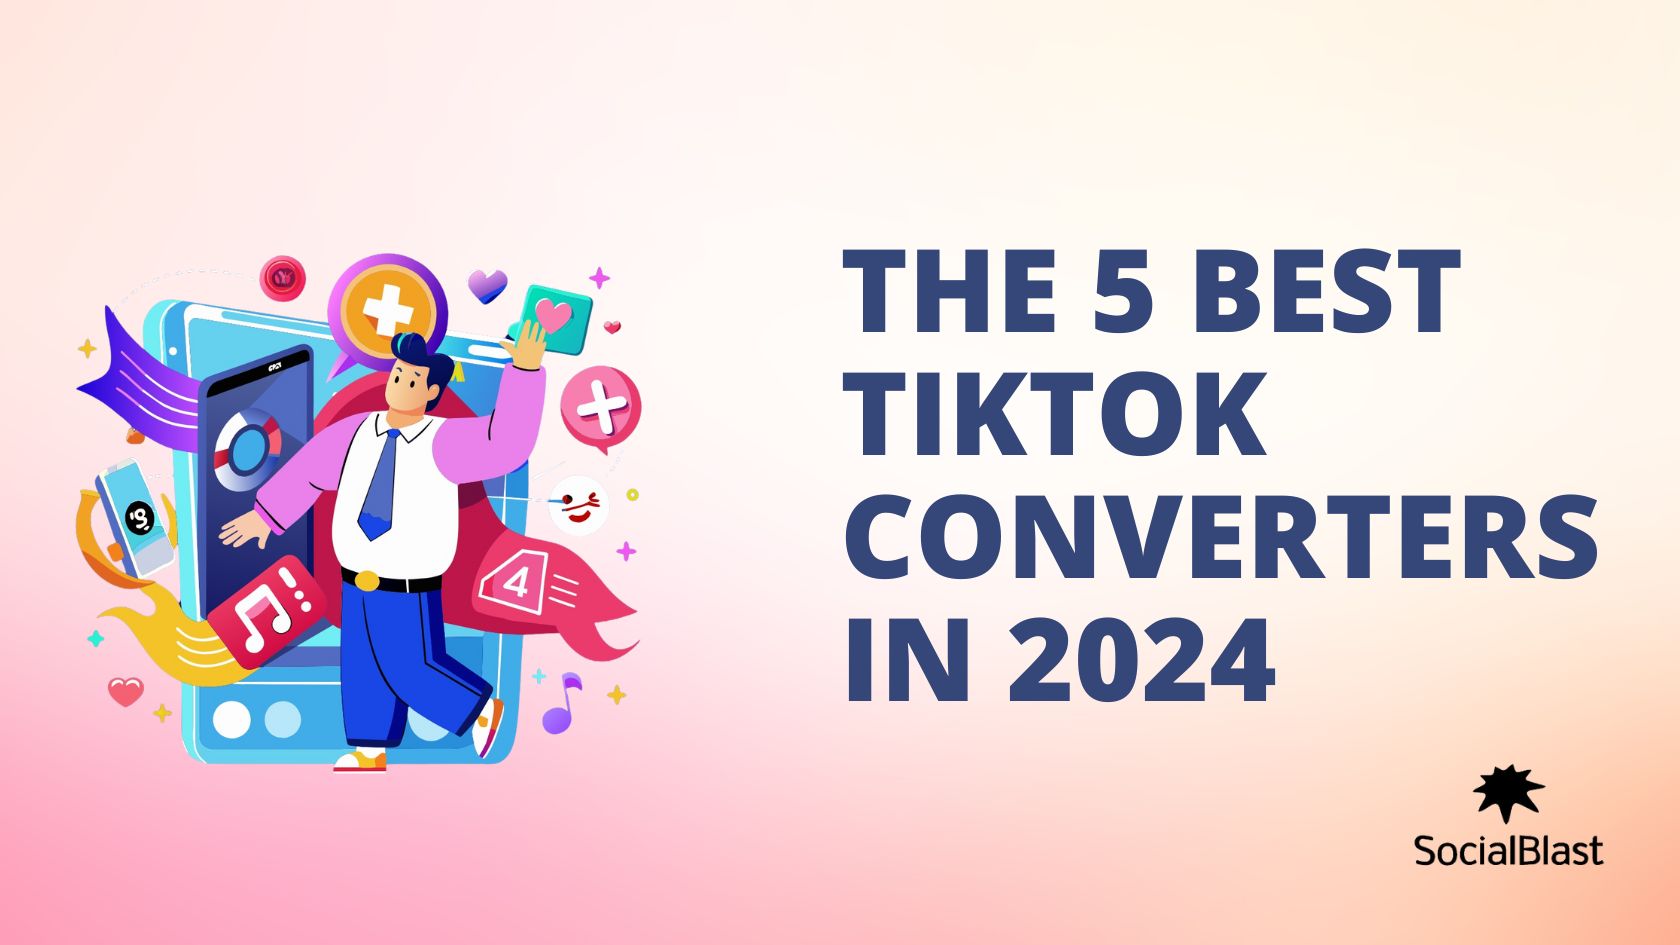 The 5 best TikTok converters in 2024 for downloading your favorite videos